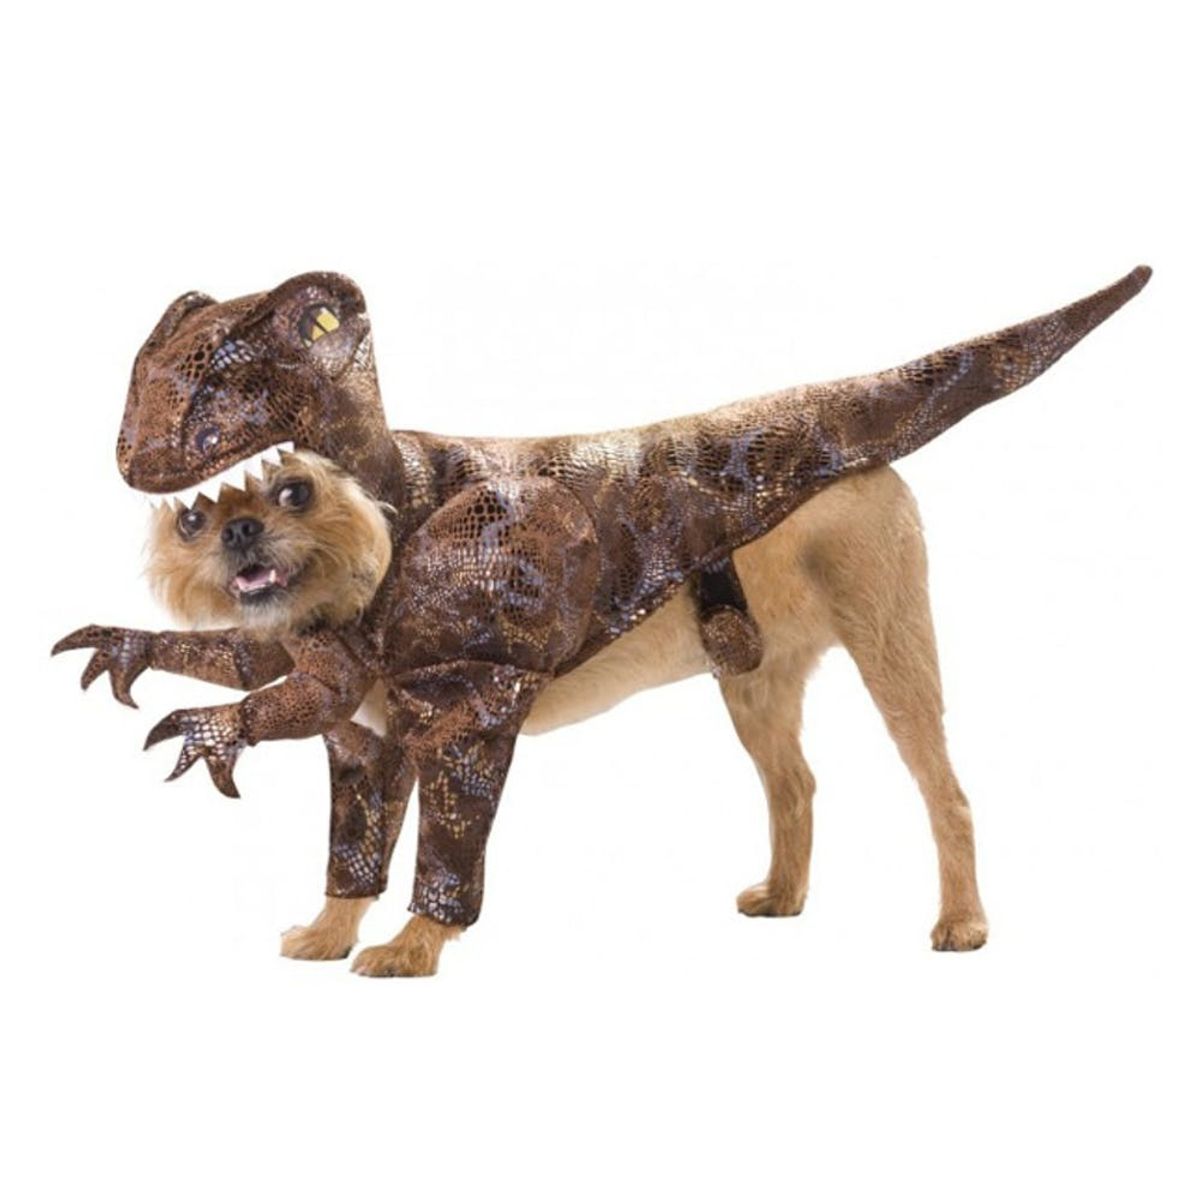 The Top 9 Best-Selling Pet Costumes Right Now